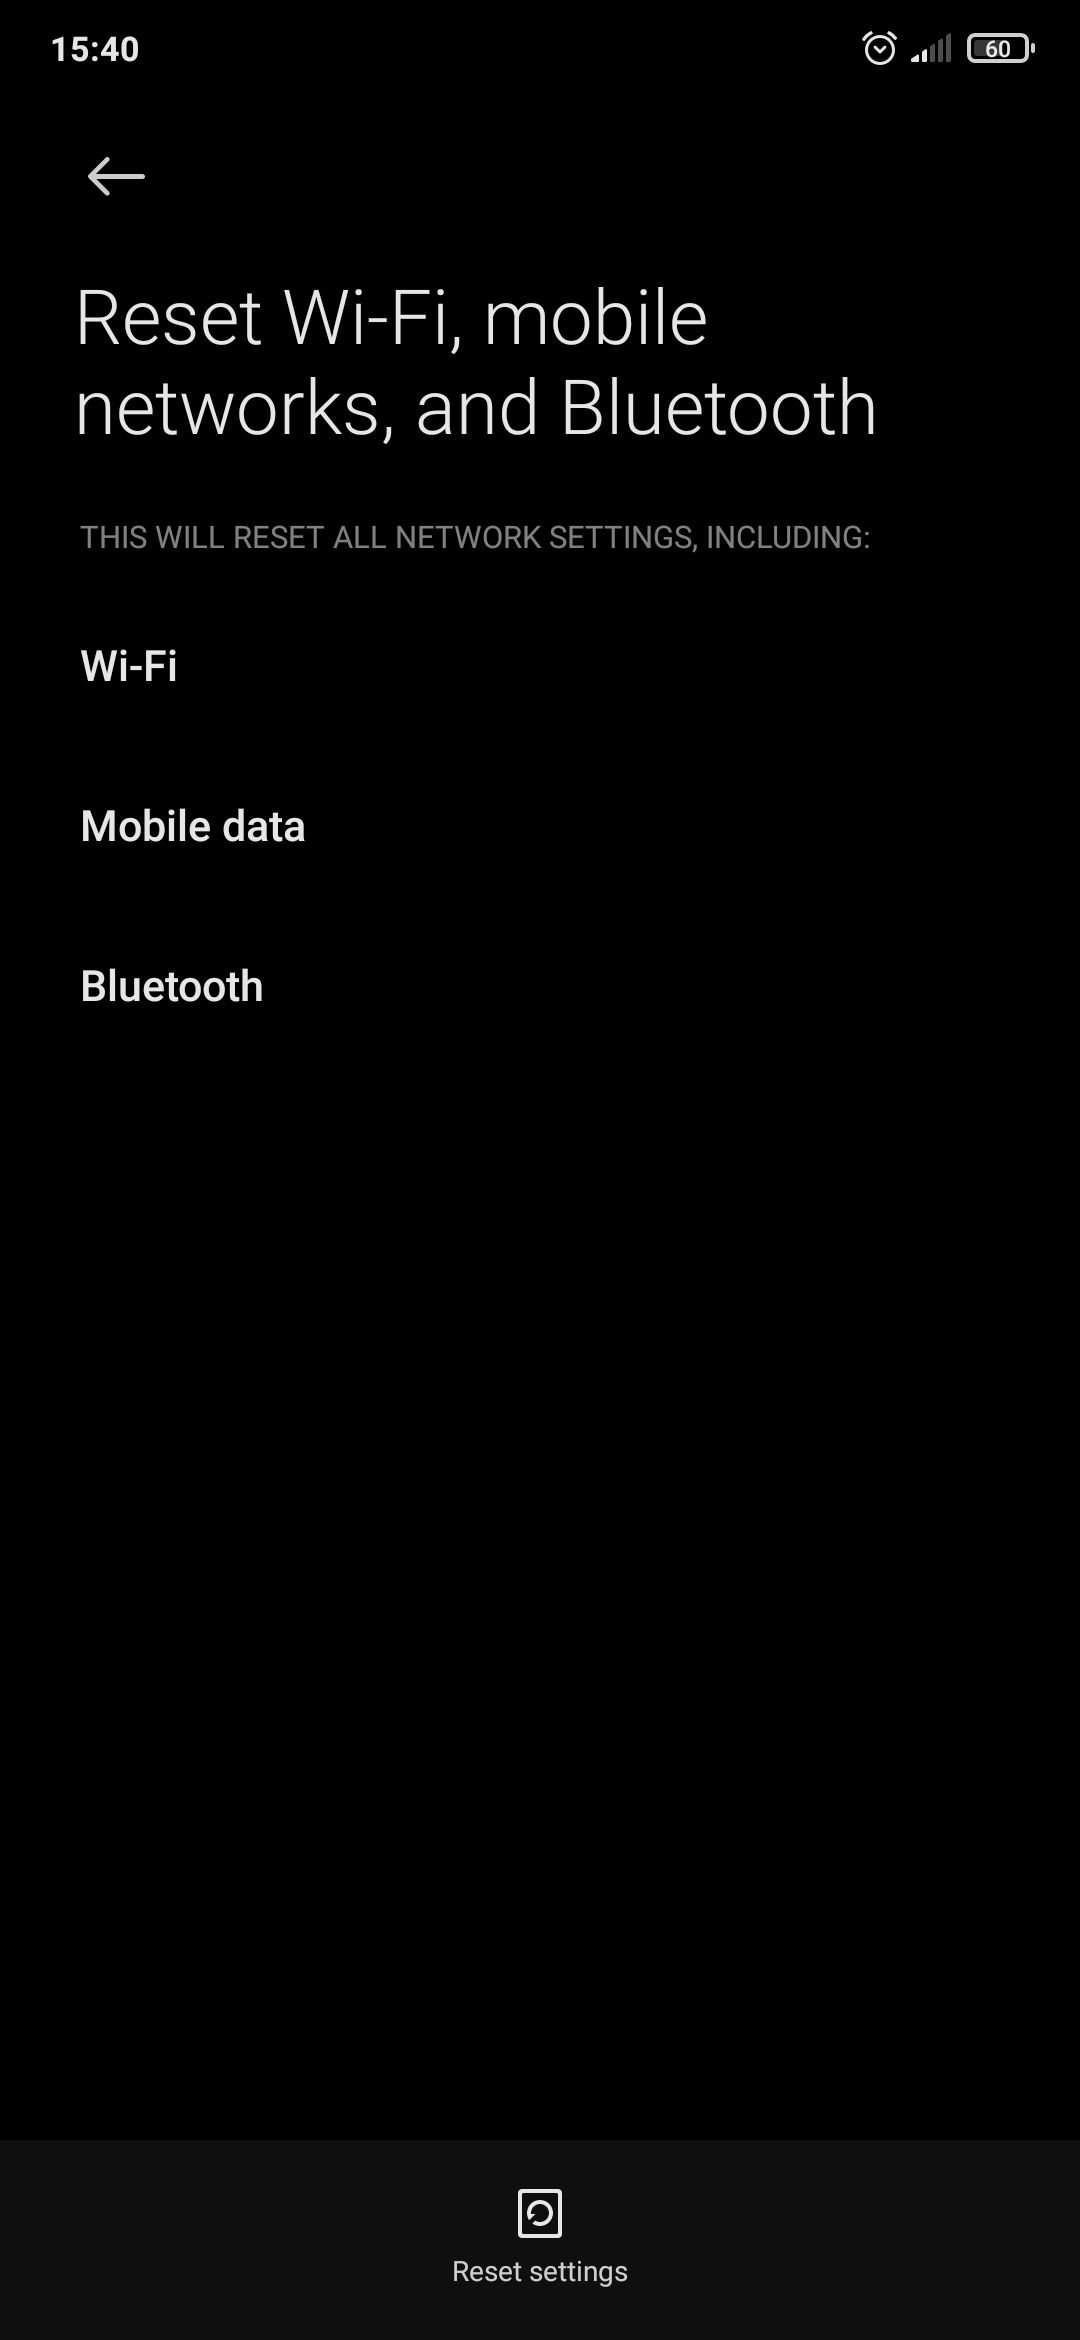 Reset network settings on Android